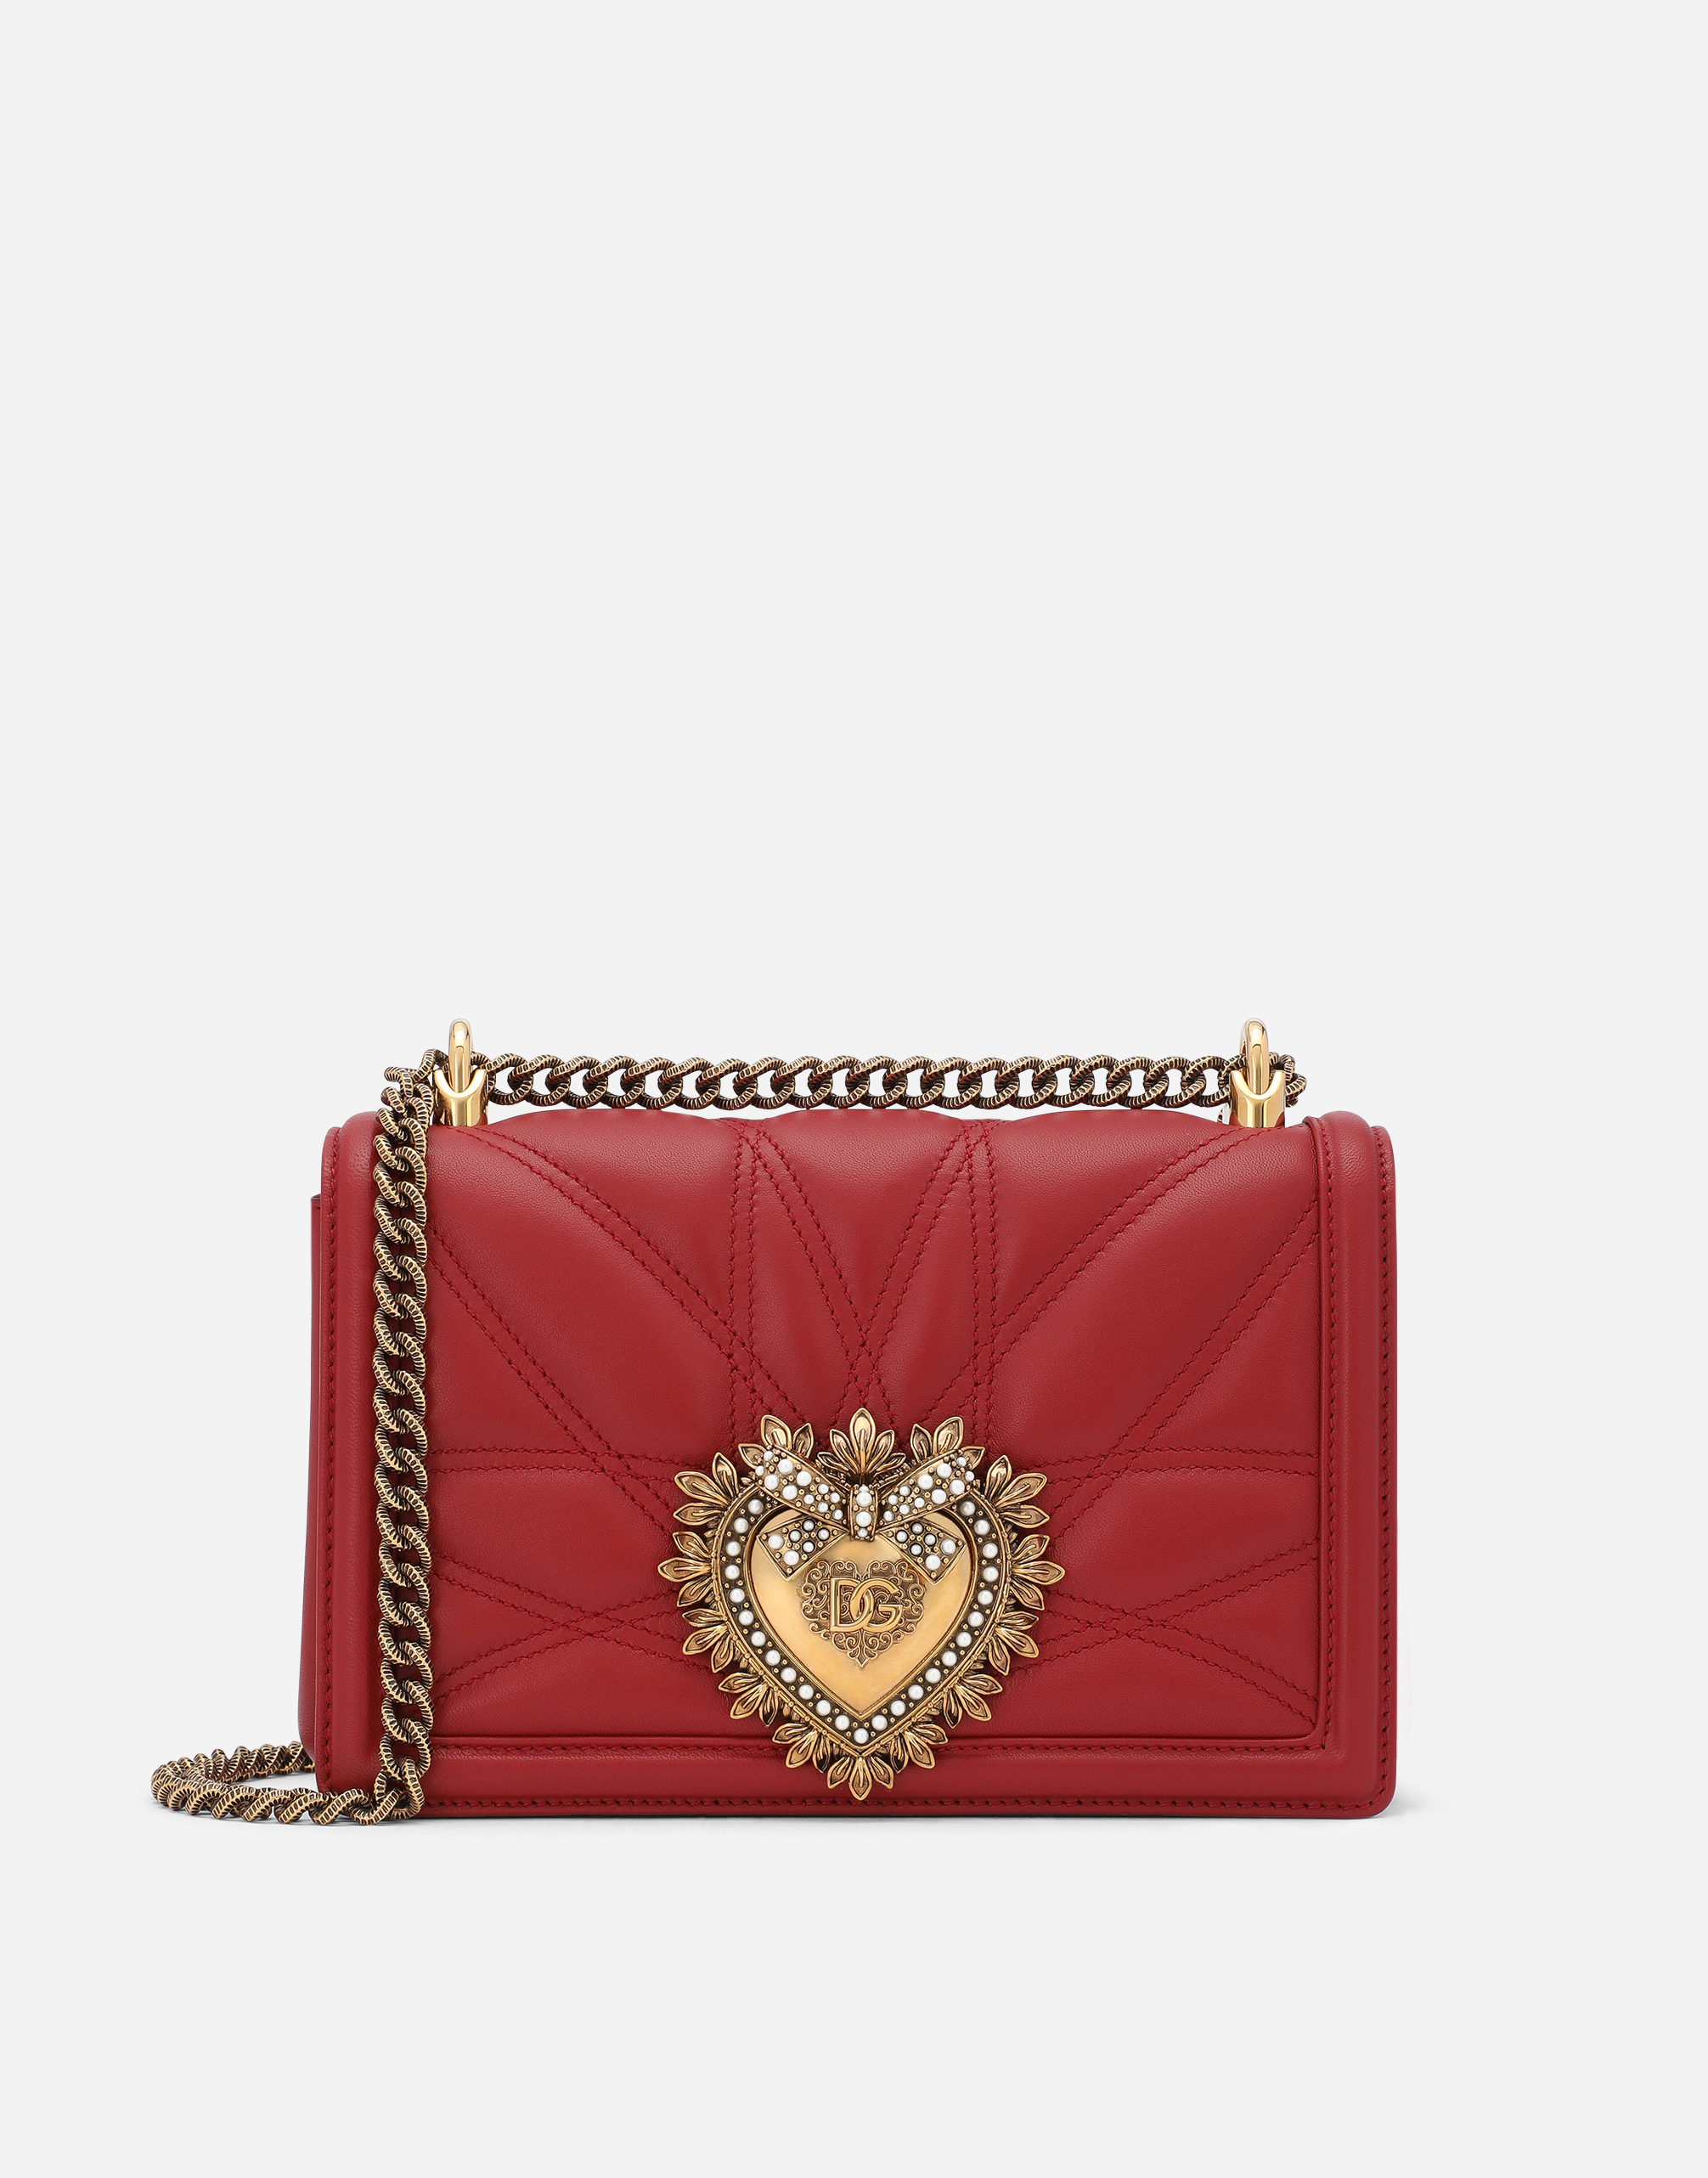 Dolce & Gabbana Medium Devotion Bag In Quilted Nappa Leather In Red